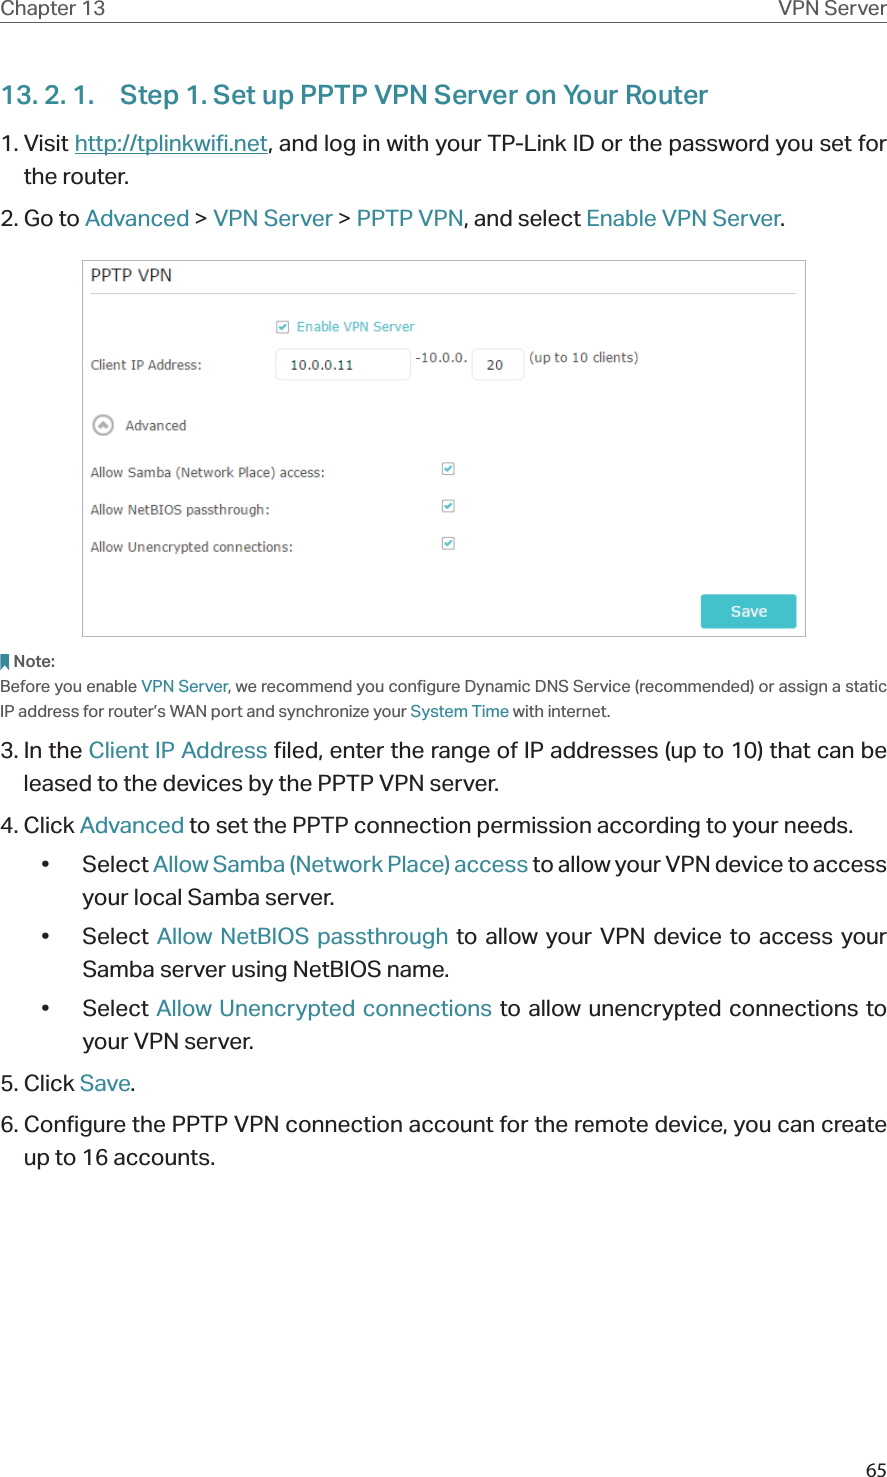 65Chapter 13 VPN Server13. 2. 1.  Step 1. Set up PPTP VPN Server on Your Router1. Visit http://tplinkwifi.net, and log in with your TP-Link ID or the password you set for the router.2. Go to Advanced &gt; VPN Server &gt; PPTP VPN, and select Enable VPN Server.Note:Before you enable VPN Server, we recommend you configure Dynamic DNS Service (recommended) or assign a static IP address for router’s WAN port and synchronize your System Time with internet.3. In the Client IP Address filed, enter the range of IP addresses (up to 10) that can be leased to the devices by the PPTP VPN server.4. Click Advanced to set the PPTP connection permission according to your needs.• Select Allow Samba (Network Place) access to allow your VPN device to access your local Samba server.• Select Allow NetBIOS passthrough to allow your VPN device to access your Samba server using NetBIOS name.• Select Allow Unencrypted connections to allow unencrypted connections to your VPN server.5. Click Save.6. Configure the PPTP VPN connection account for the remote device, you can create up to 16 accounts.